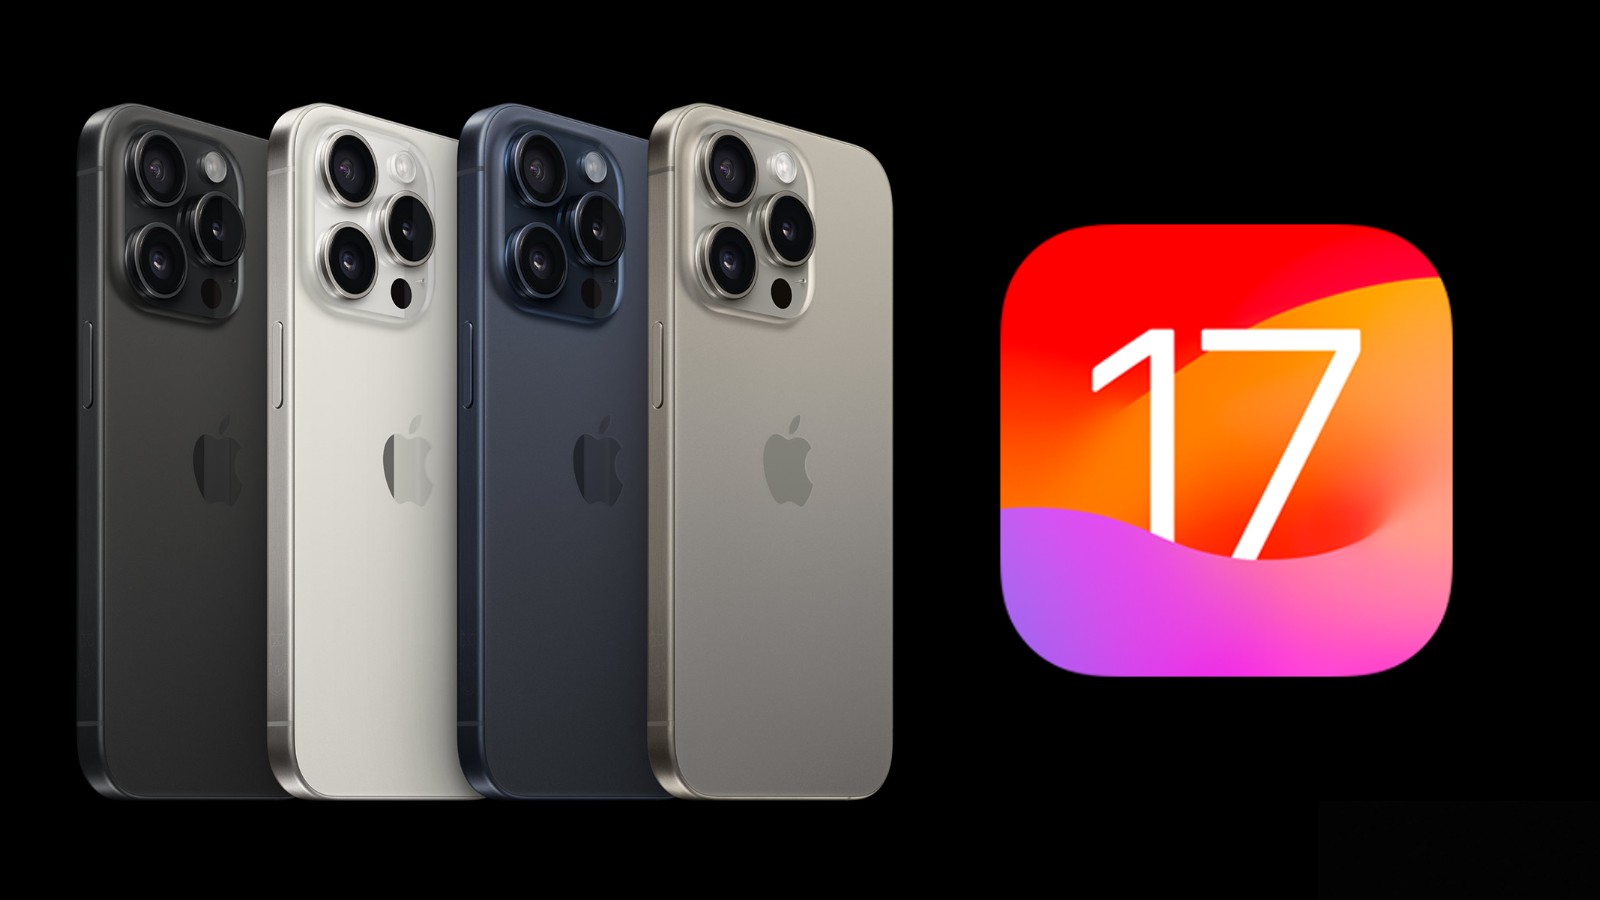 iOS 17.5 update will introduce these new features to your iPhone